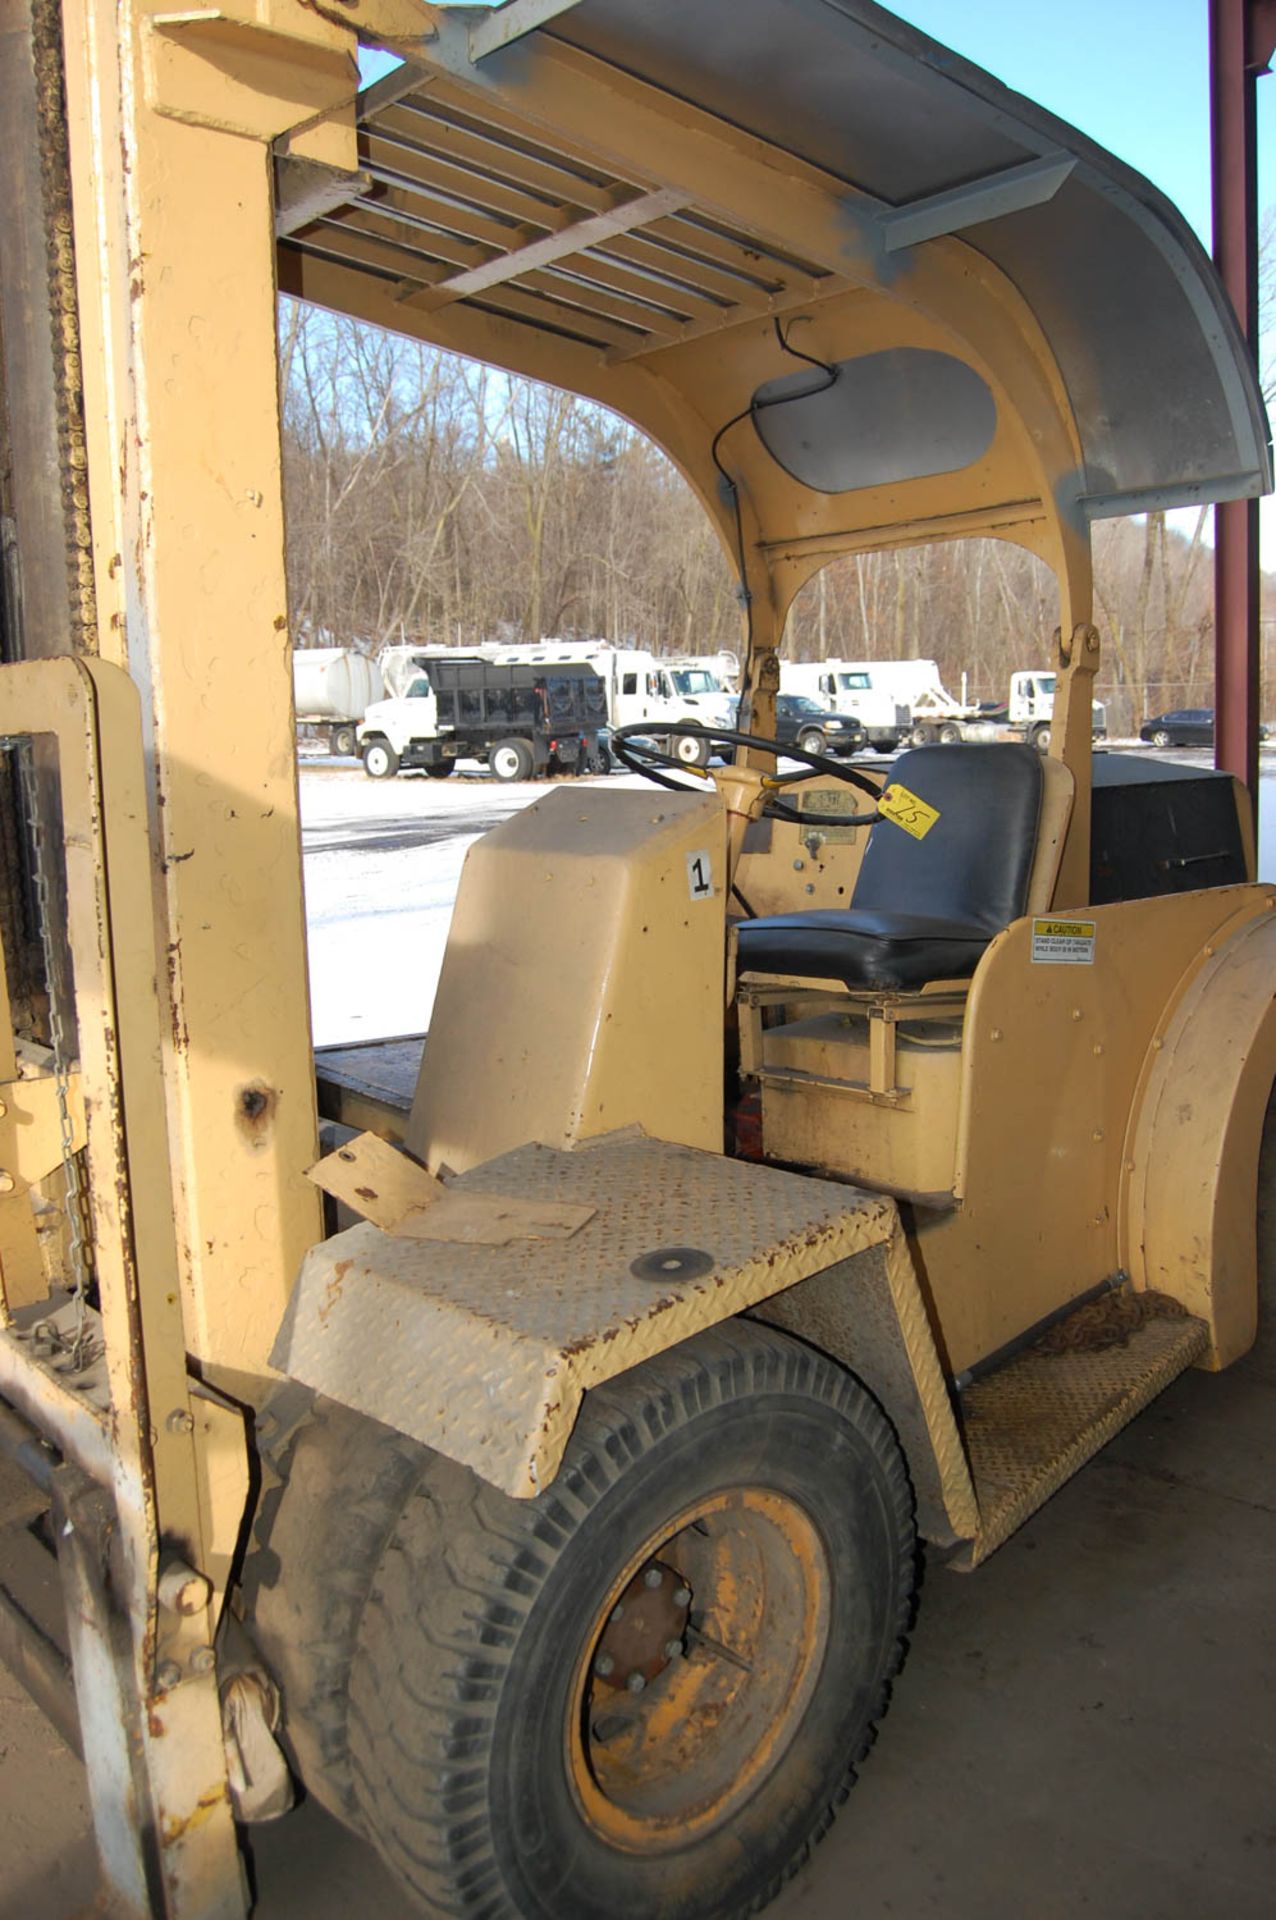 HYSTER MDL. RT-150 ''SPACESAVER'' 15,000# CAPACITY FORKLIFT TRUCK, PNEUMATIC TIRES, S/N: RT-67453 - Image 2 of 11